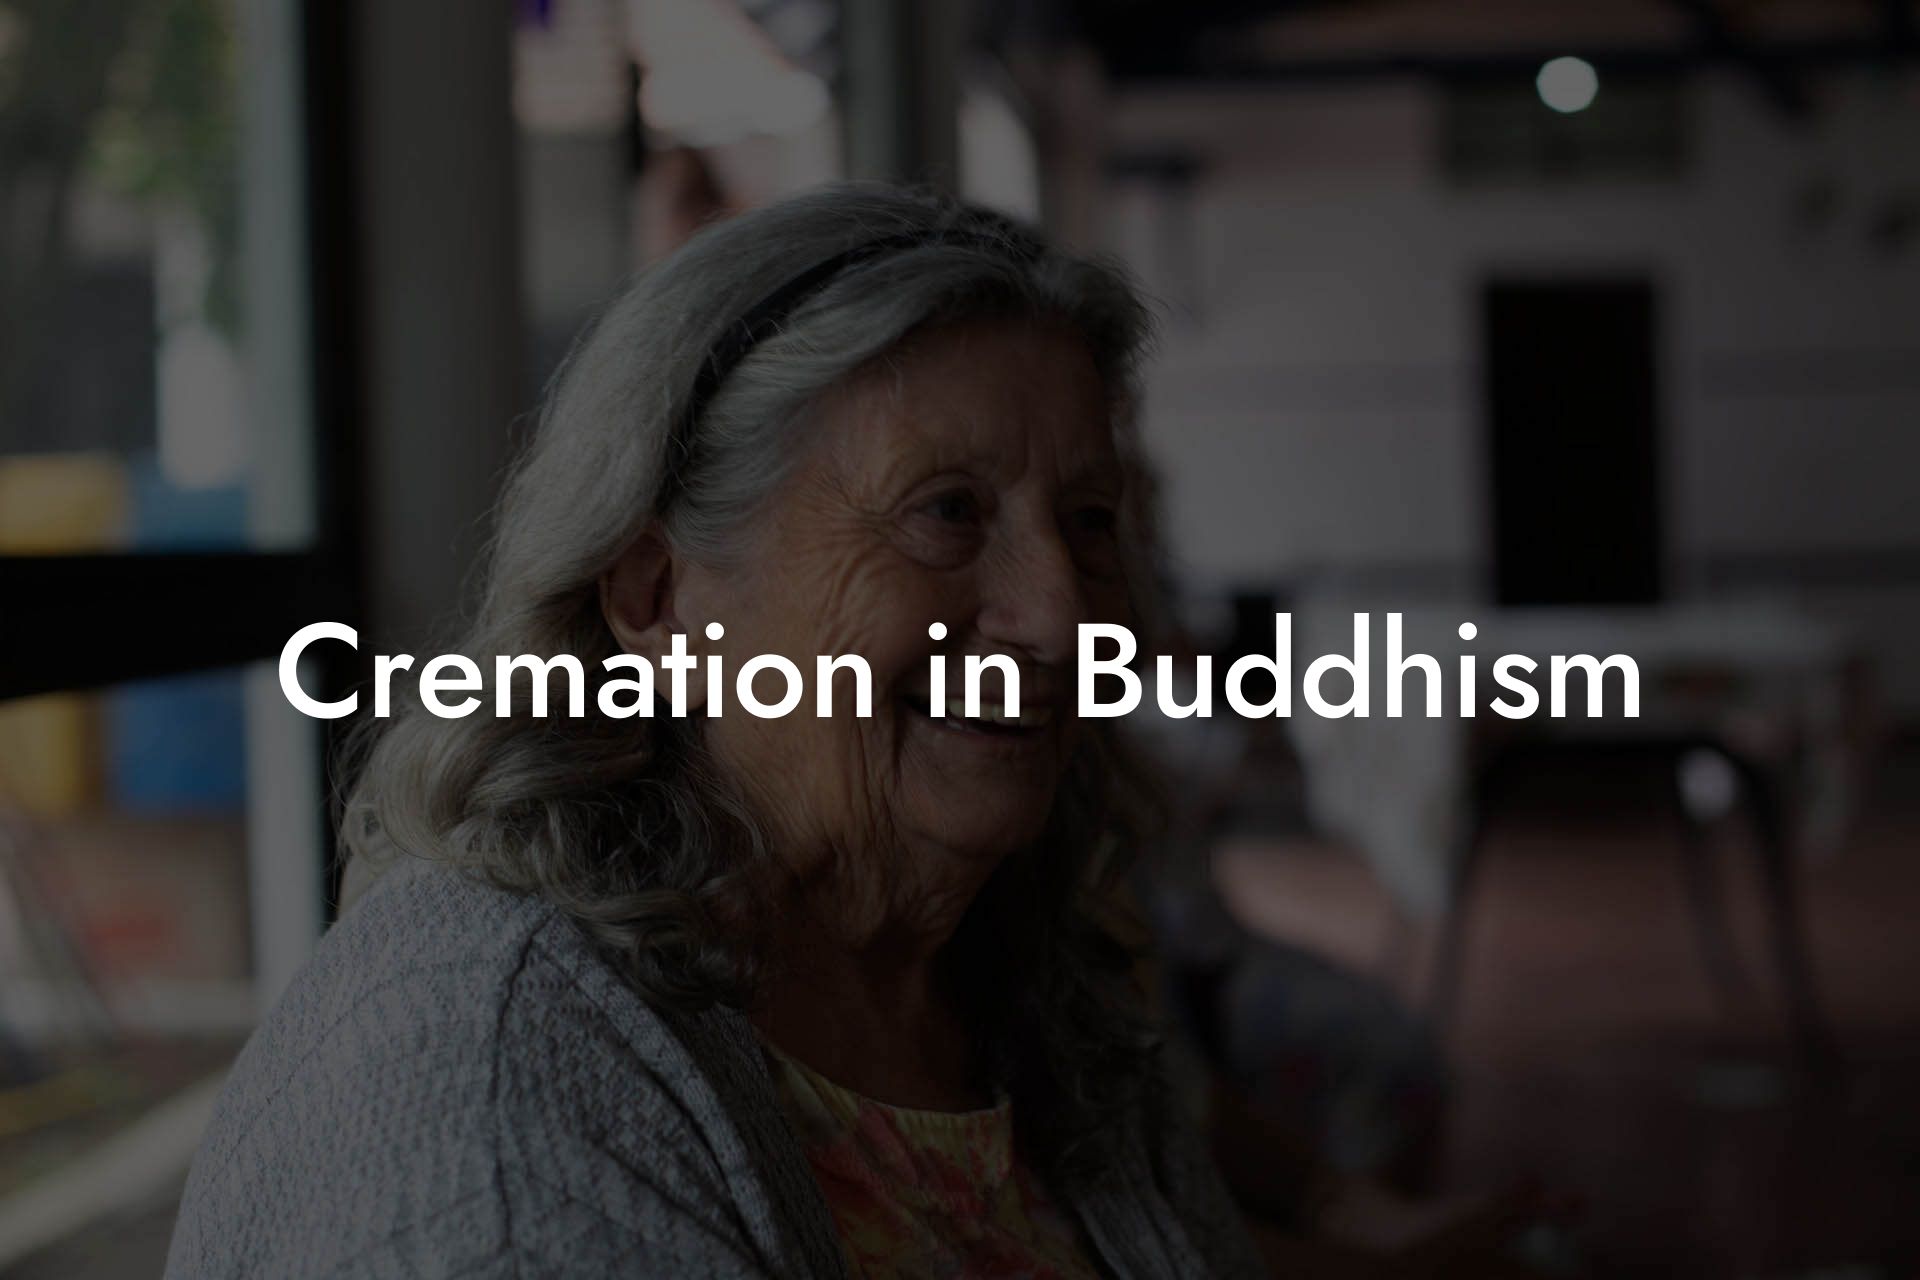 Cremation in Buddhism